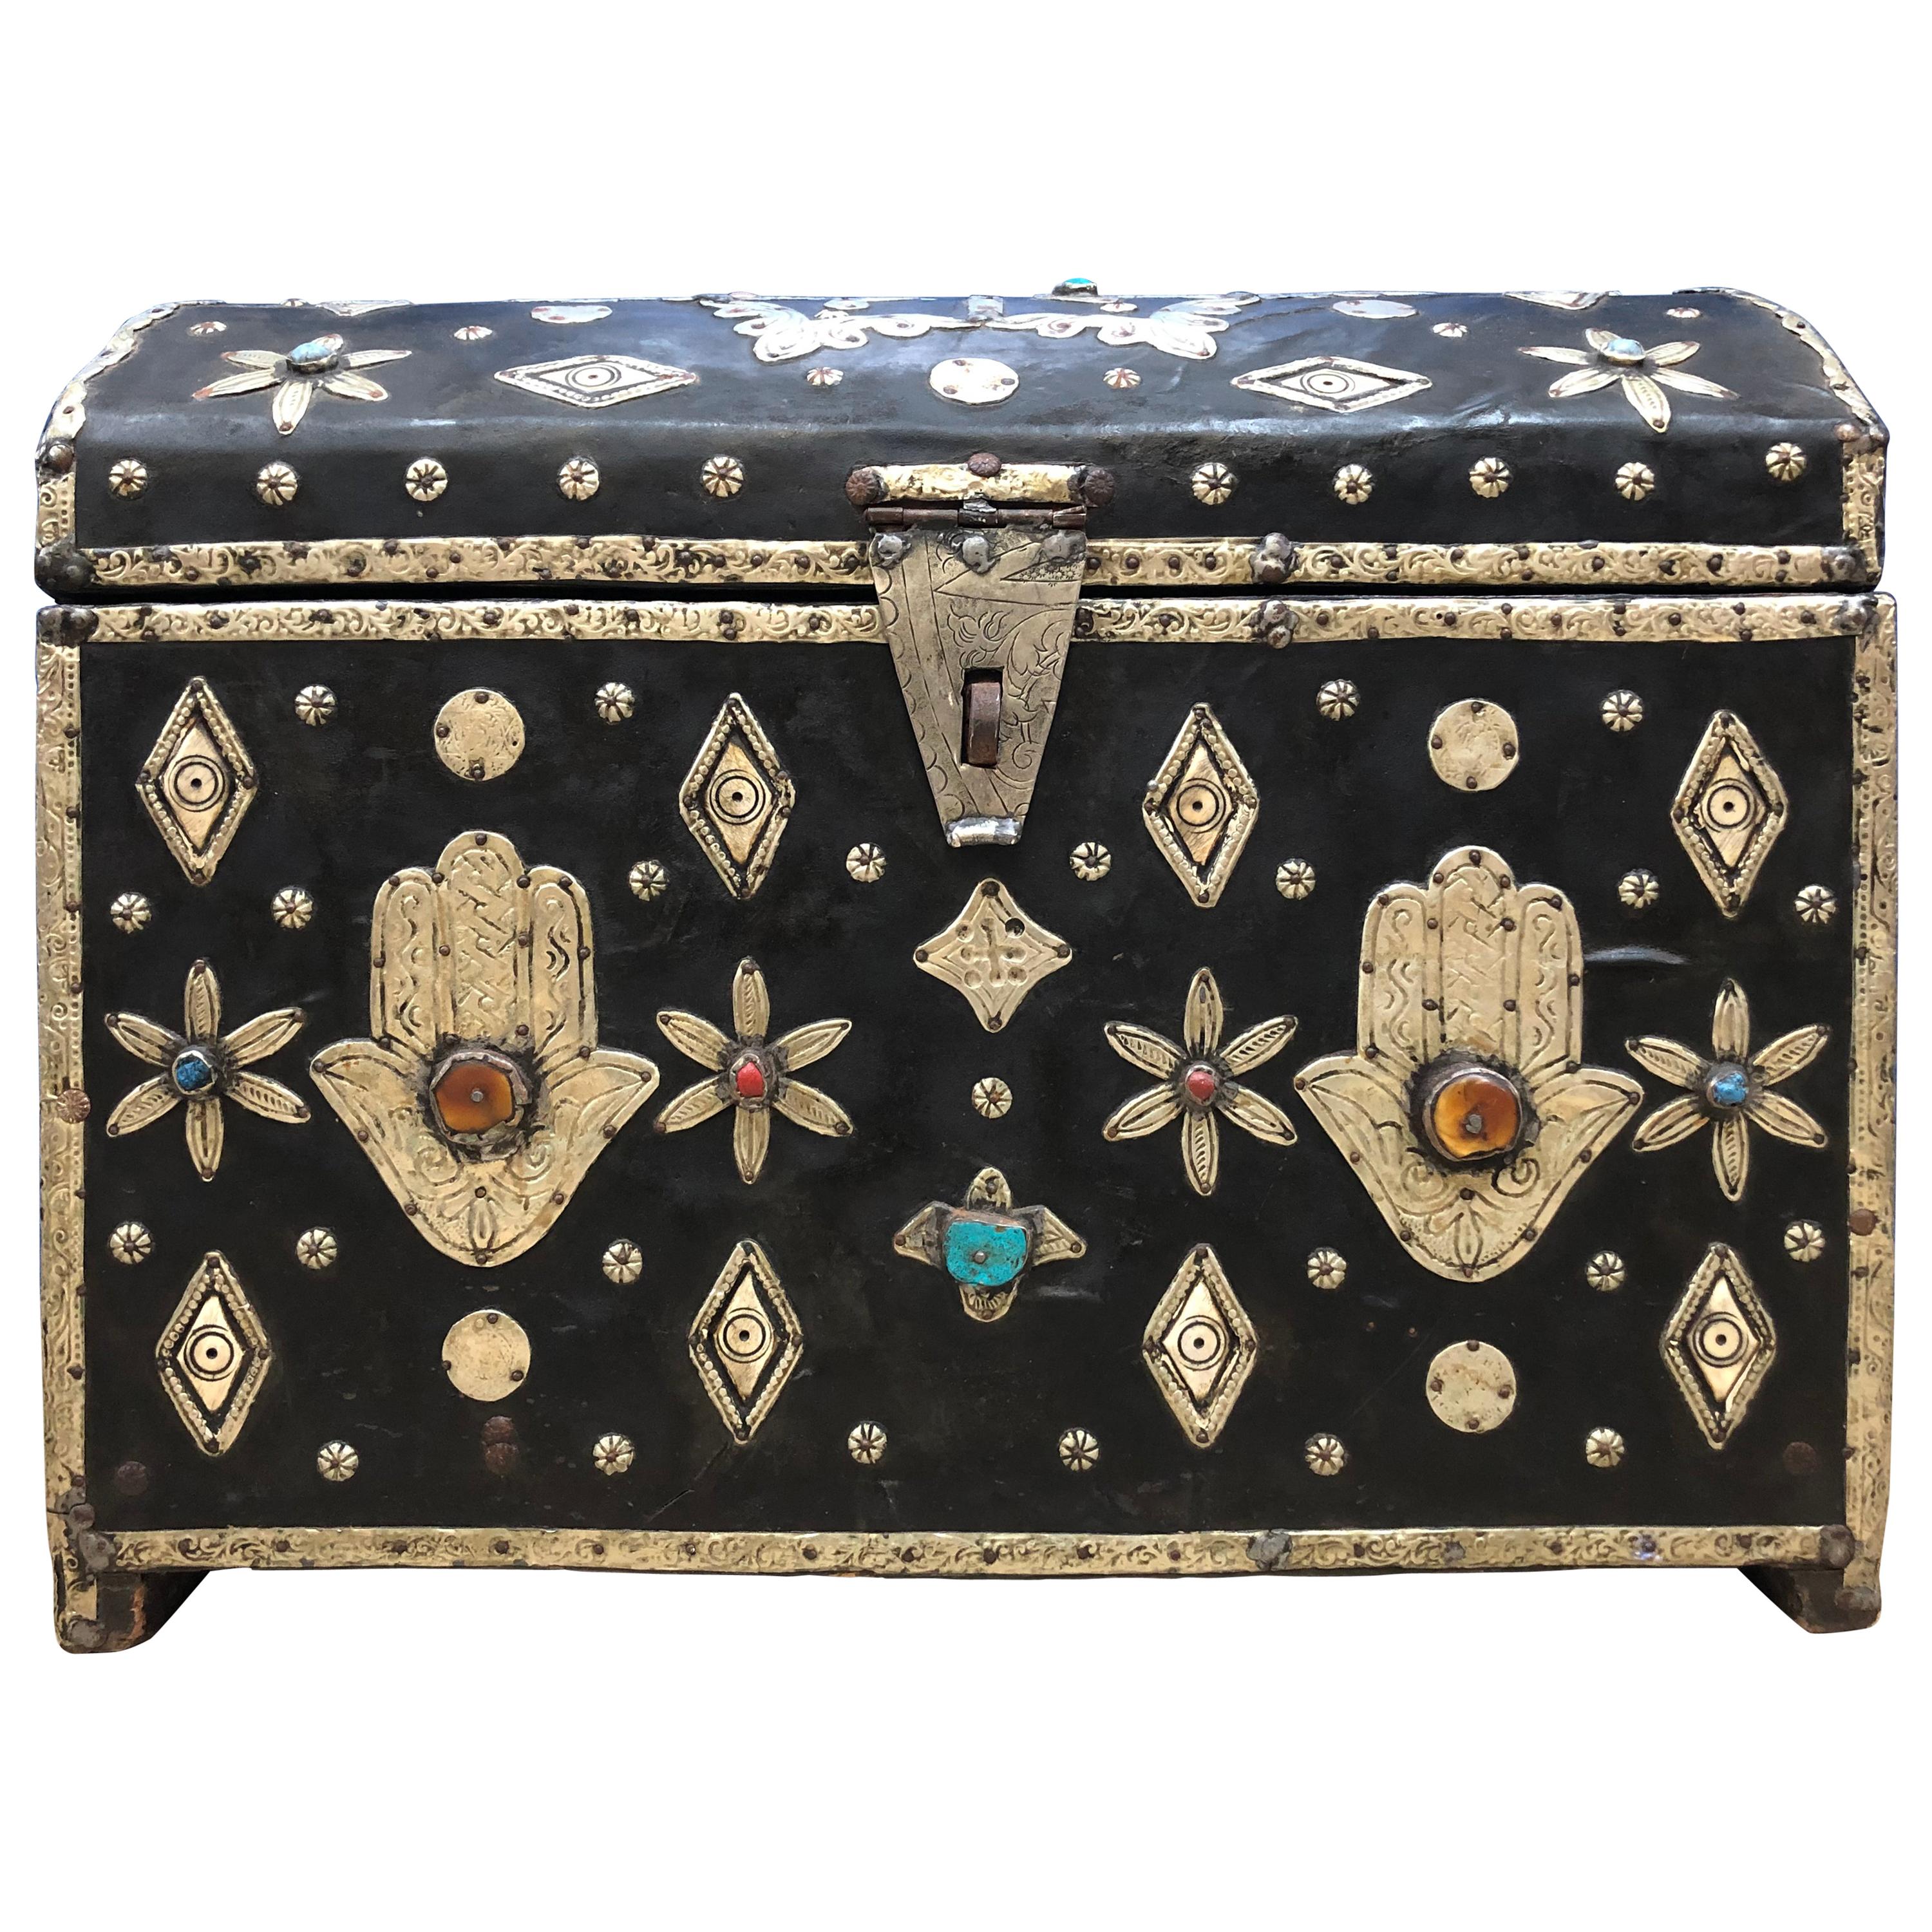 Early 1900s Moroccan Chest - Leather, Bone, Silver, Gems, Hamsa - Luxe Boho Chic im Angebot